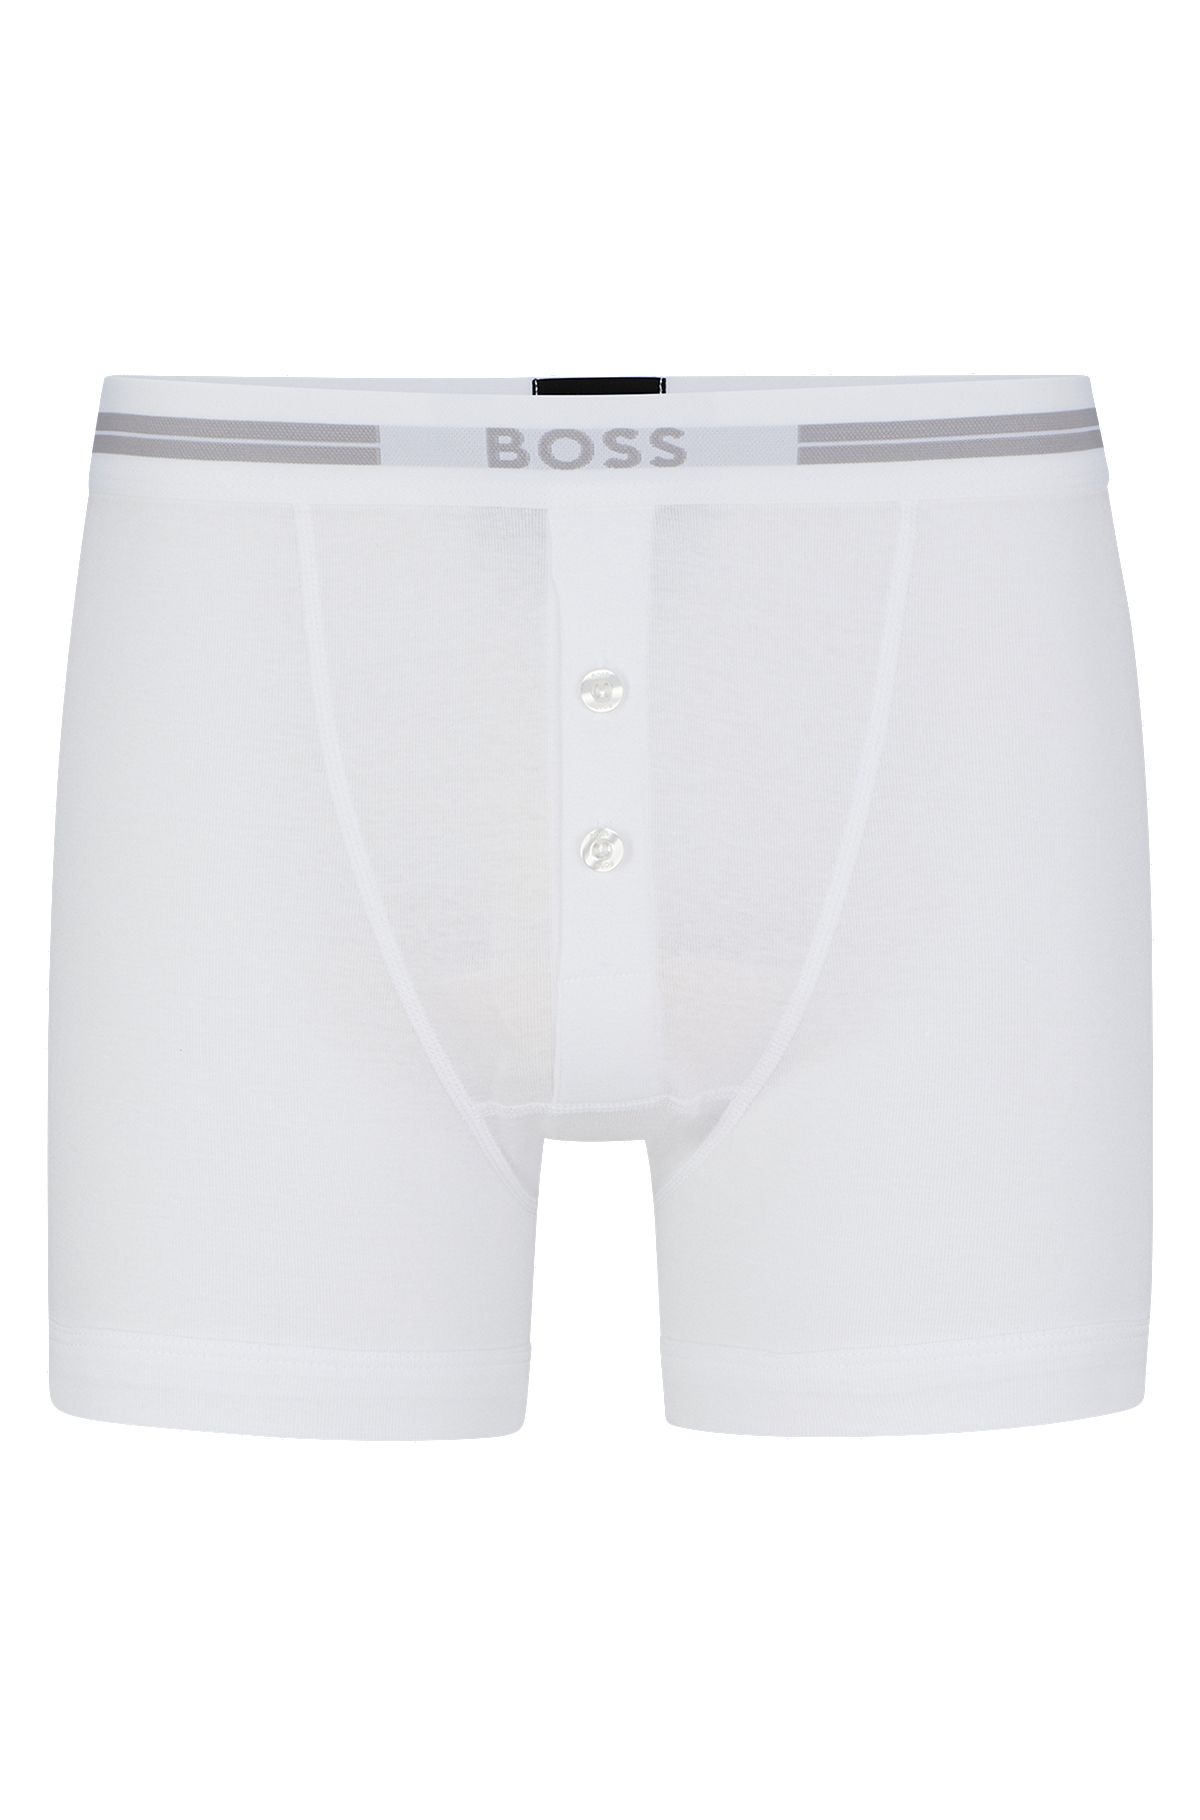 Hugo Boss X Russell Athletic Boxer Brief White 50465256-100 - Free